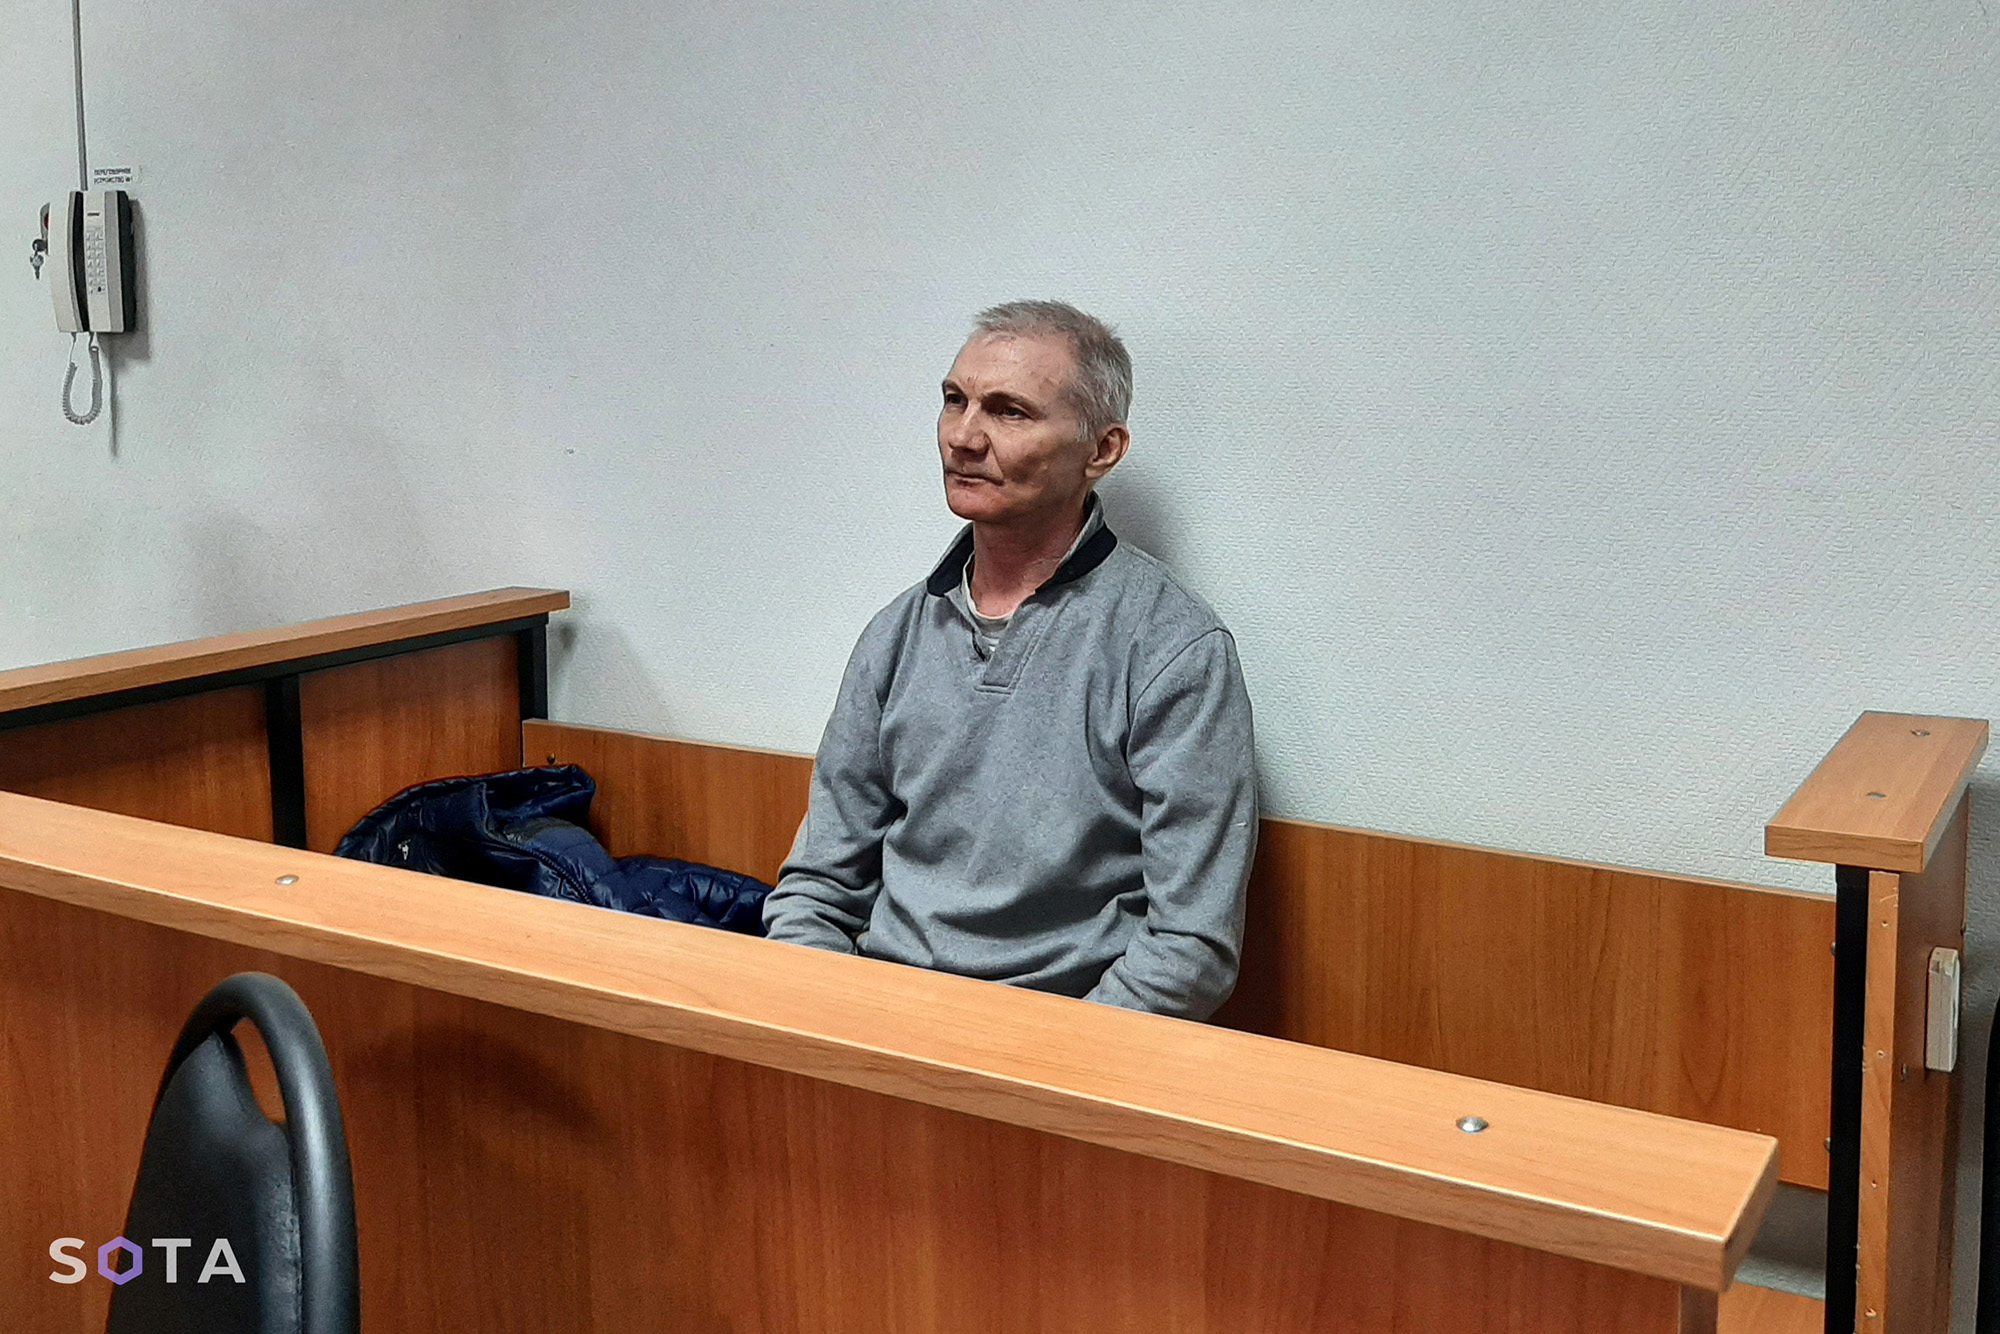 Russian citizen Alexei Moskalyov attends a court hearing in the town of Yefremov in the Tula region, Russia, on March 27.